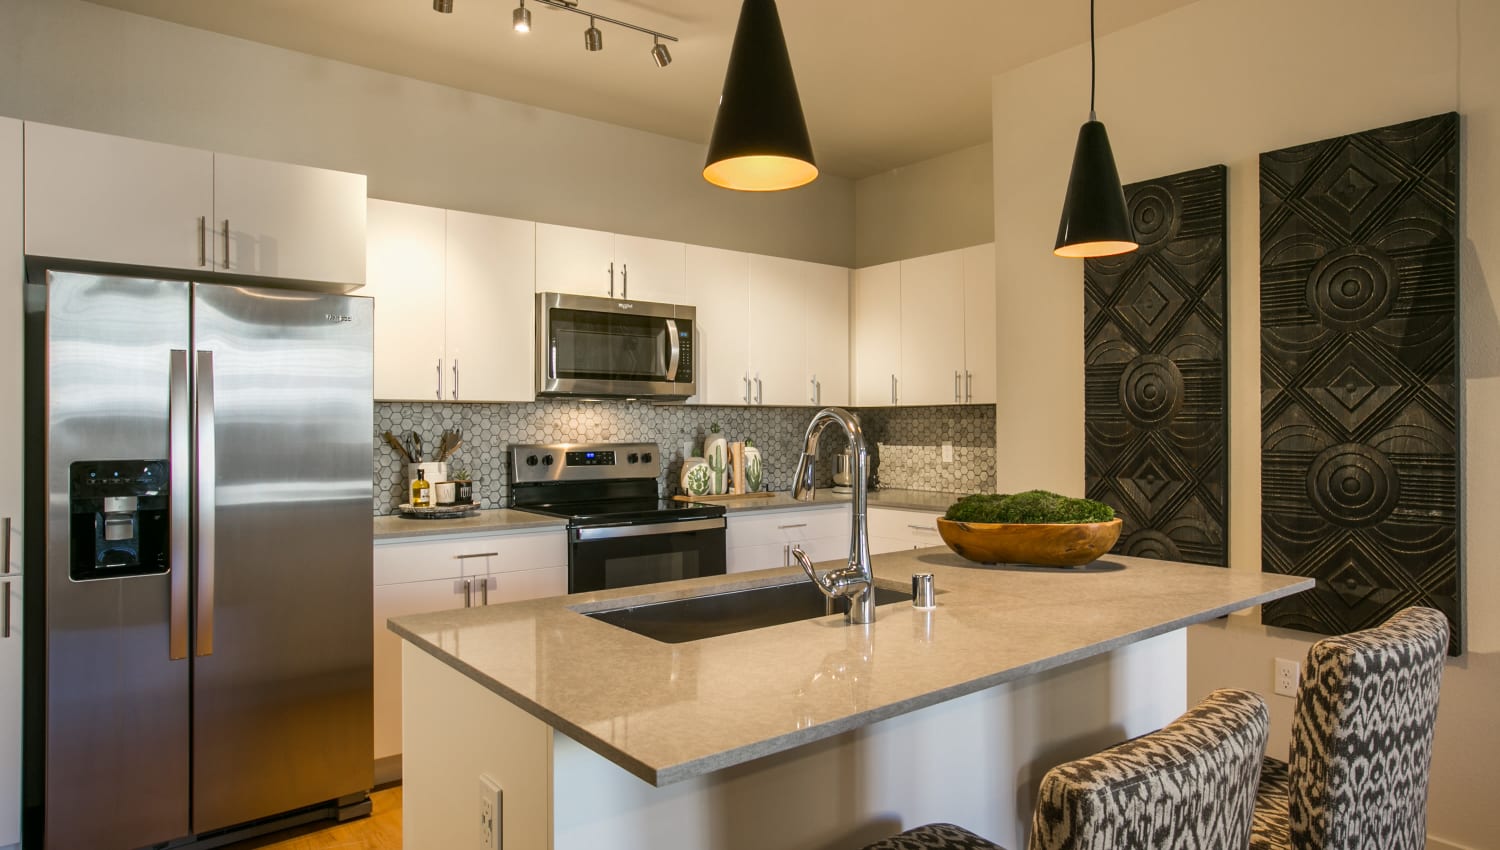 Modern kitchen with stainless-steel appliances and island at Olympus de Santa Fe, Santa Fe, New Mexico 